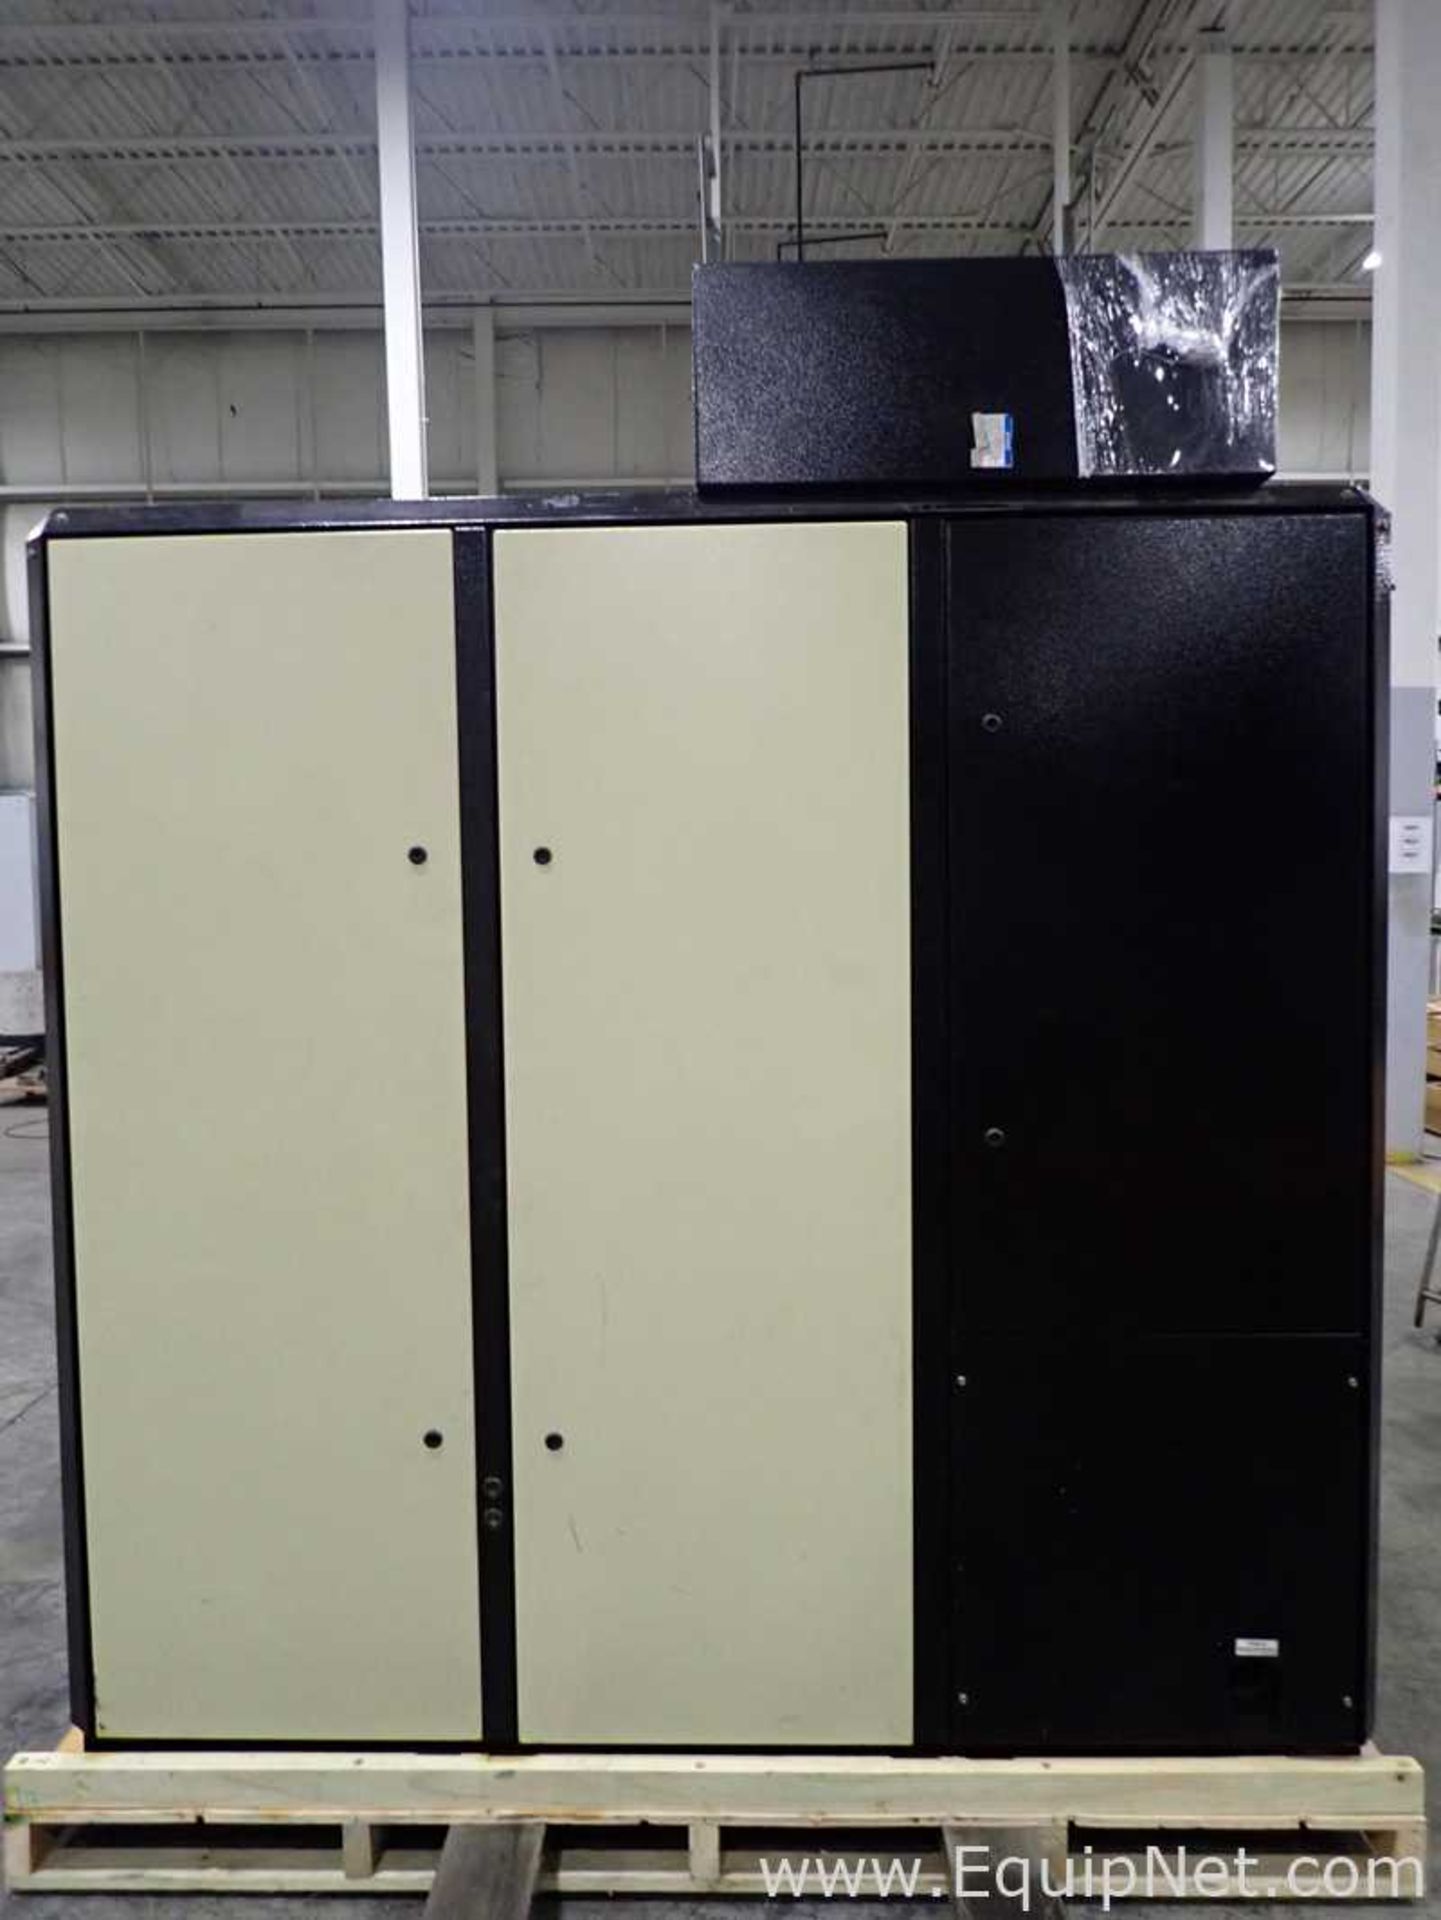 EQUIPNET LISTING #834126; REMOVAL COST: $40; MODEL: IRN50H-OF; DESCRIPTION: Ingersoll Rand IRN50H-OF - Image 10 of 16